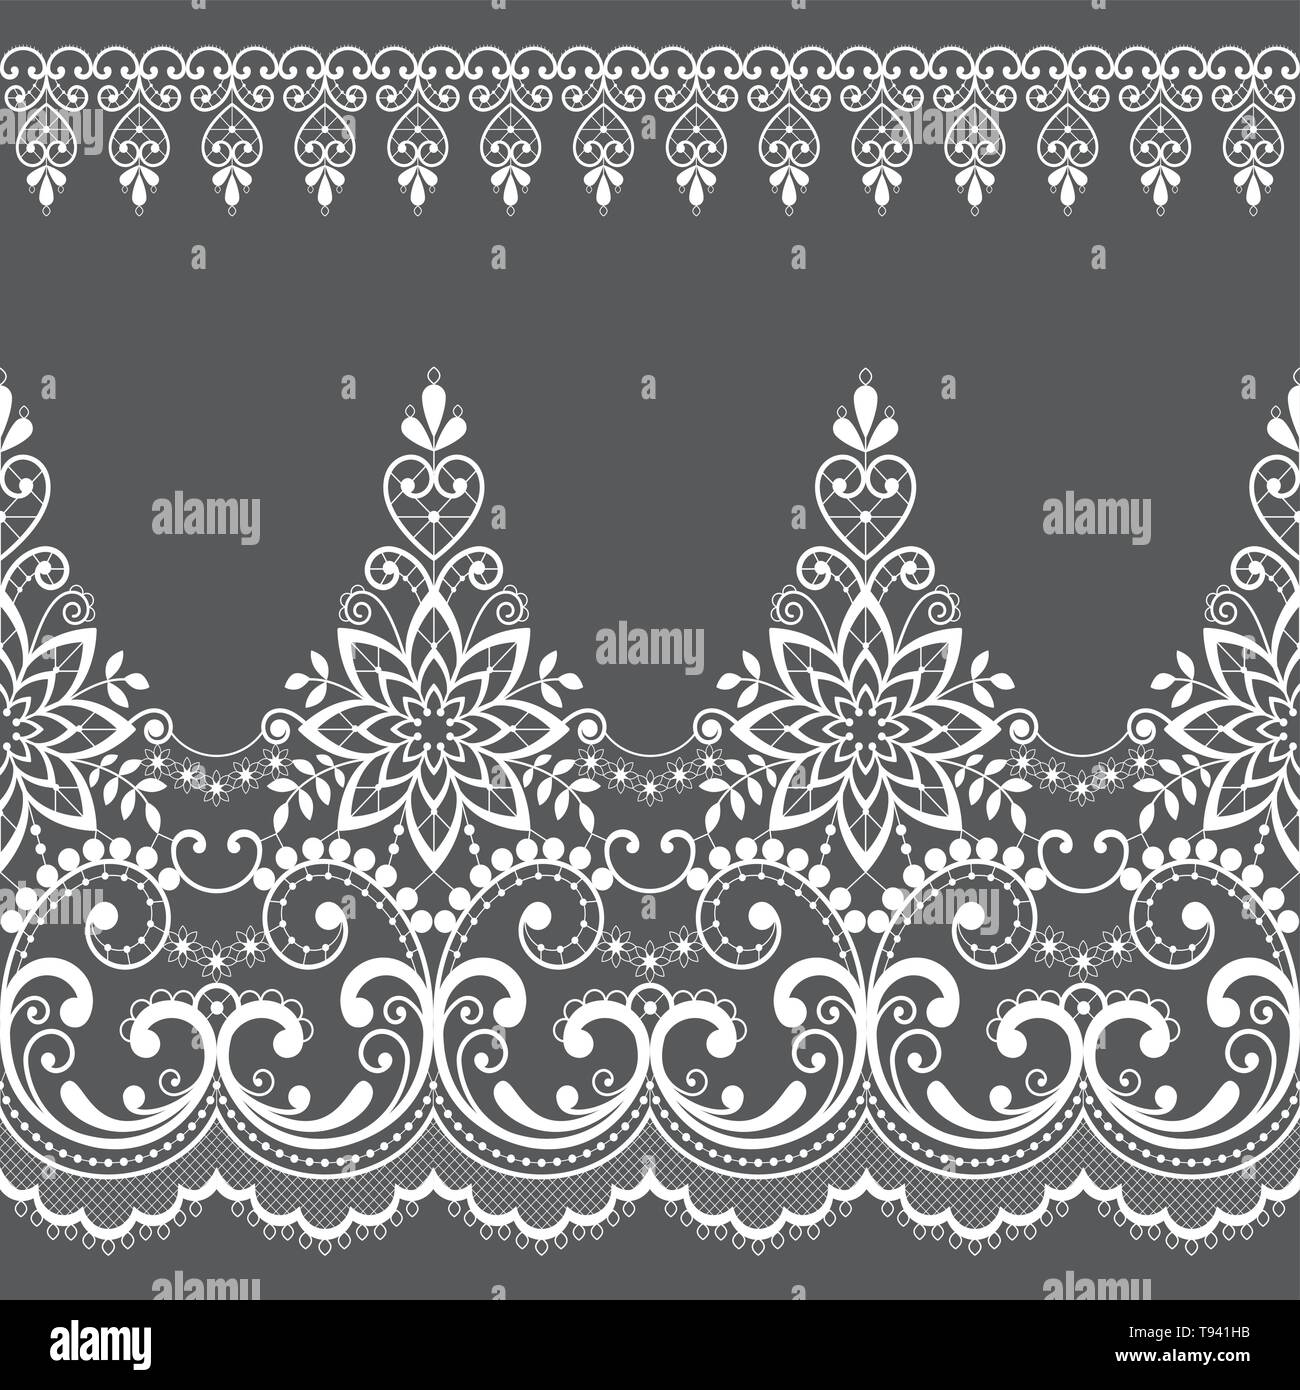 Vector seamless lace ribbon borders. Illustration of lace pattern